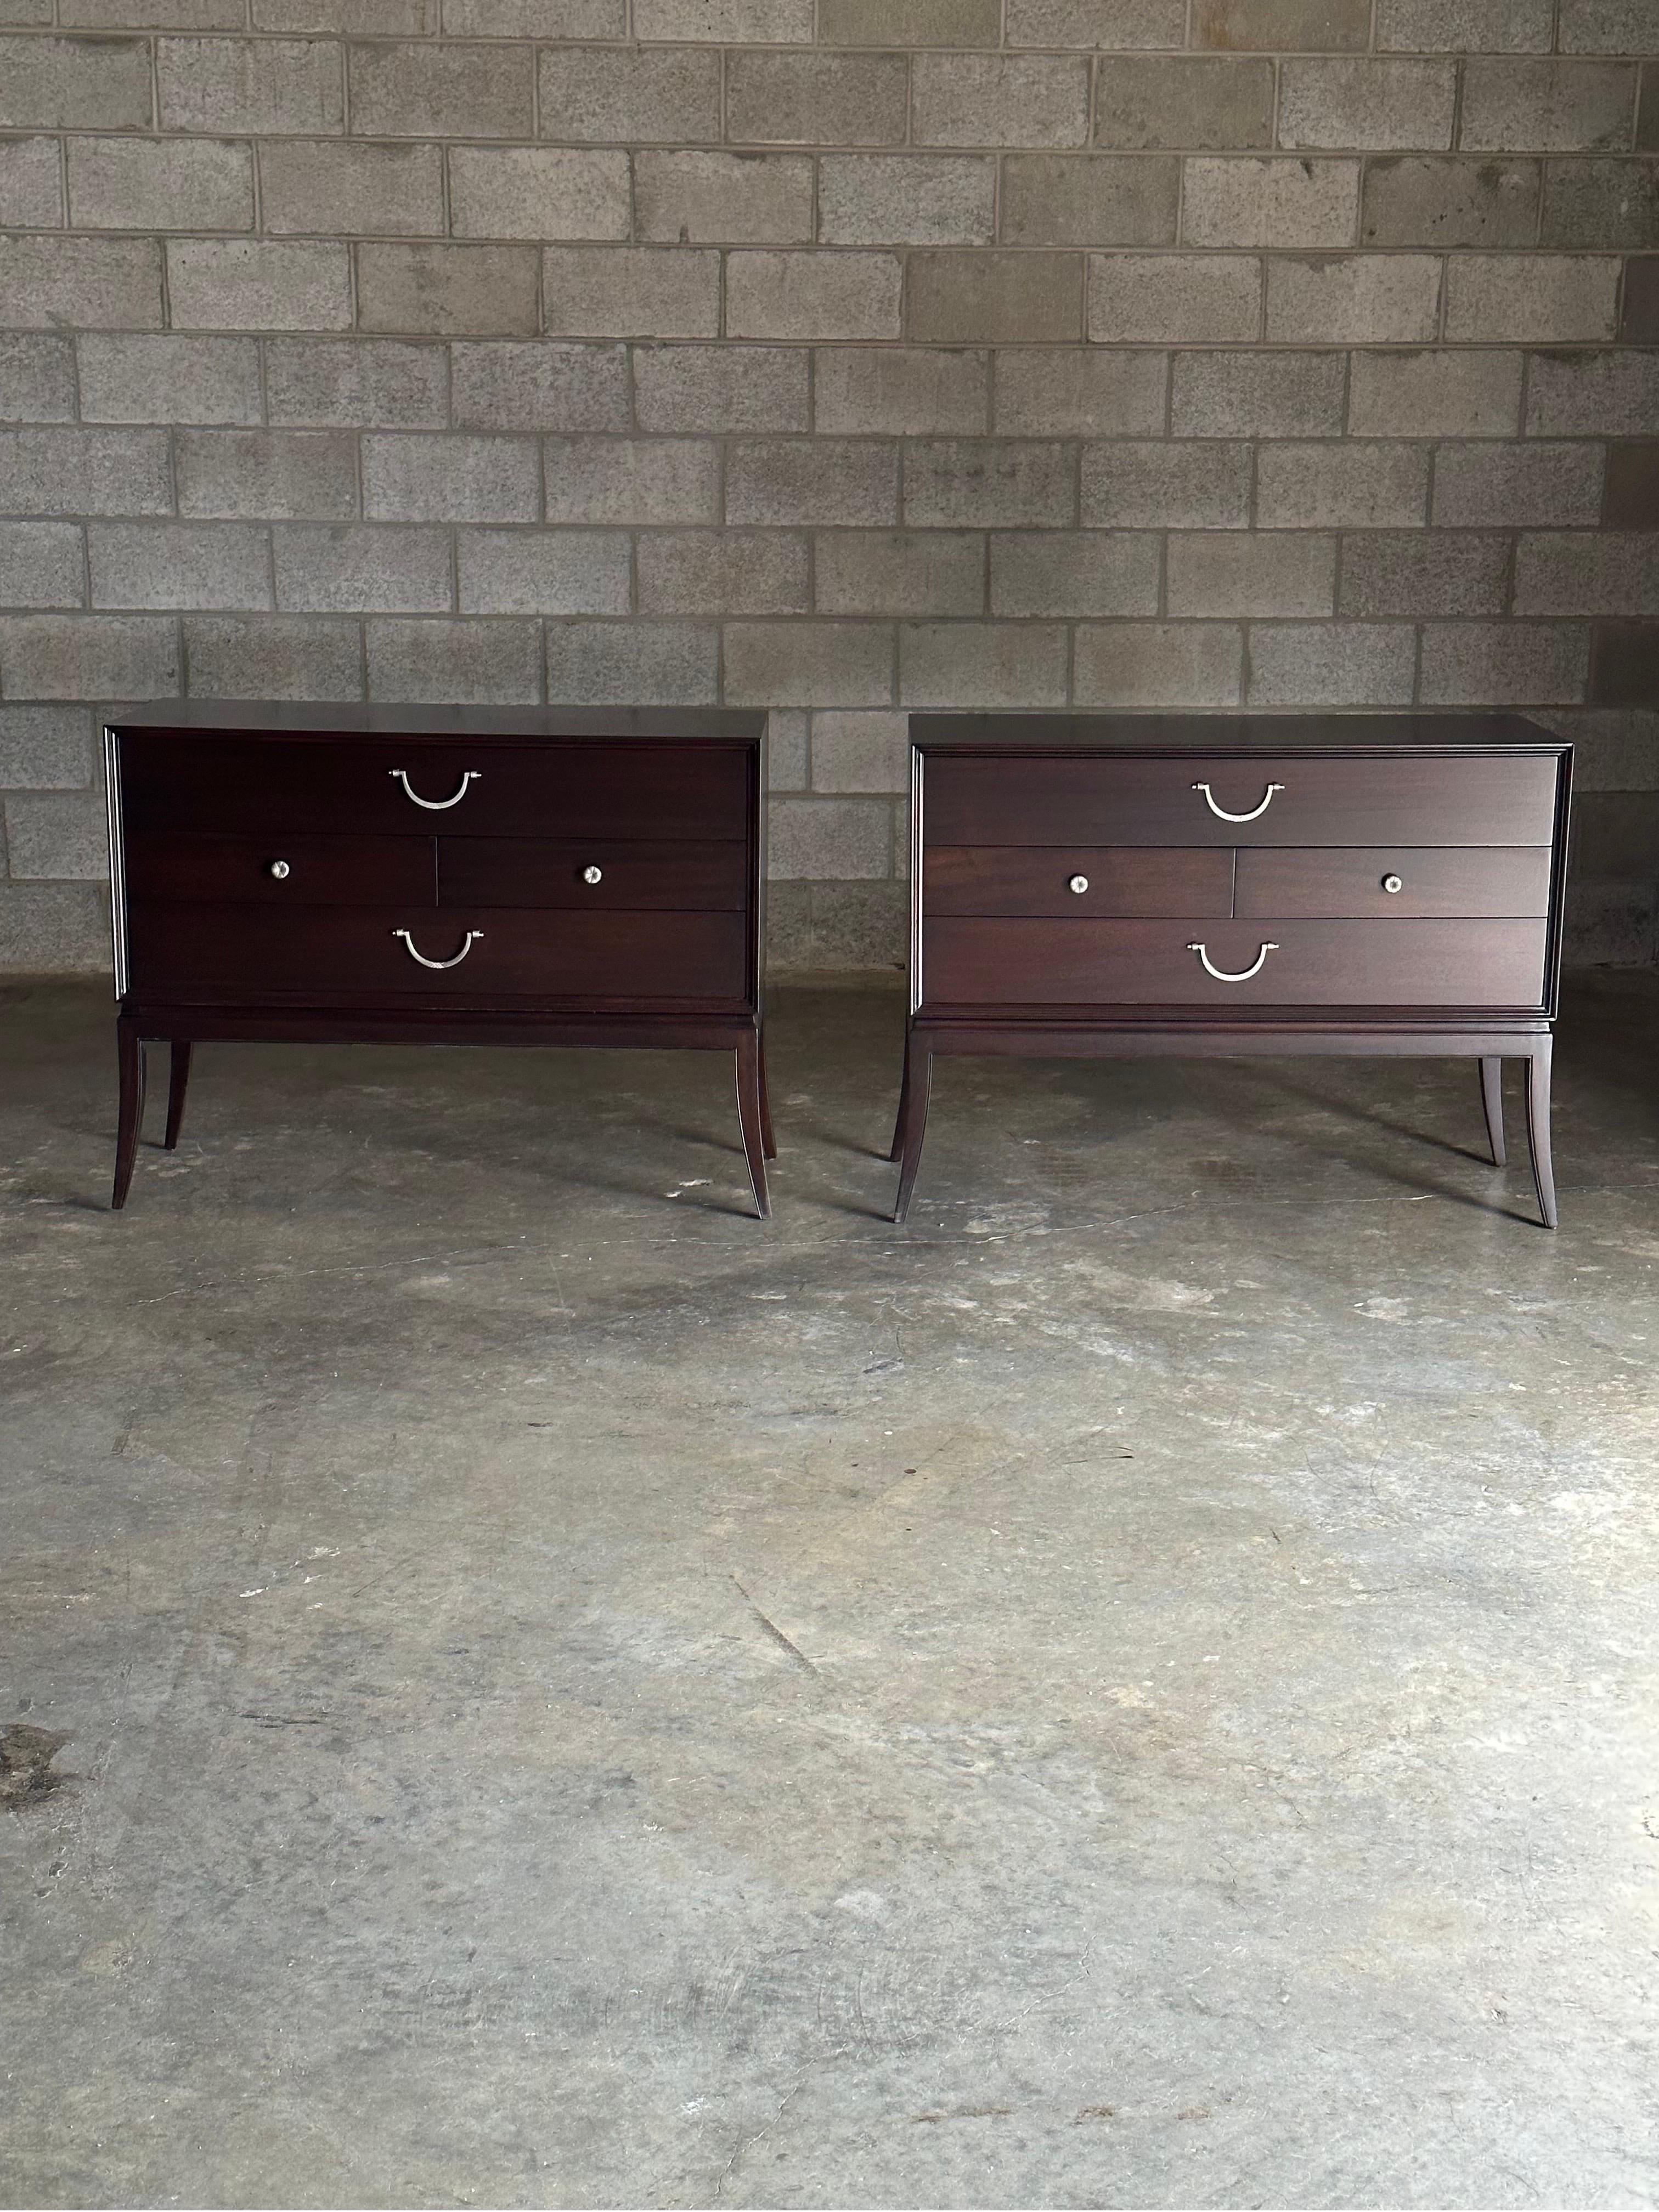 An elegant and rare pair of chests/ commodes designed by Tommi Parzinger for Charak Modern. Each chest features two large drawers and two half drawers, finished in an elegant mahogany case with exceptional hardware, resting above klismo or saber